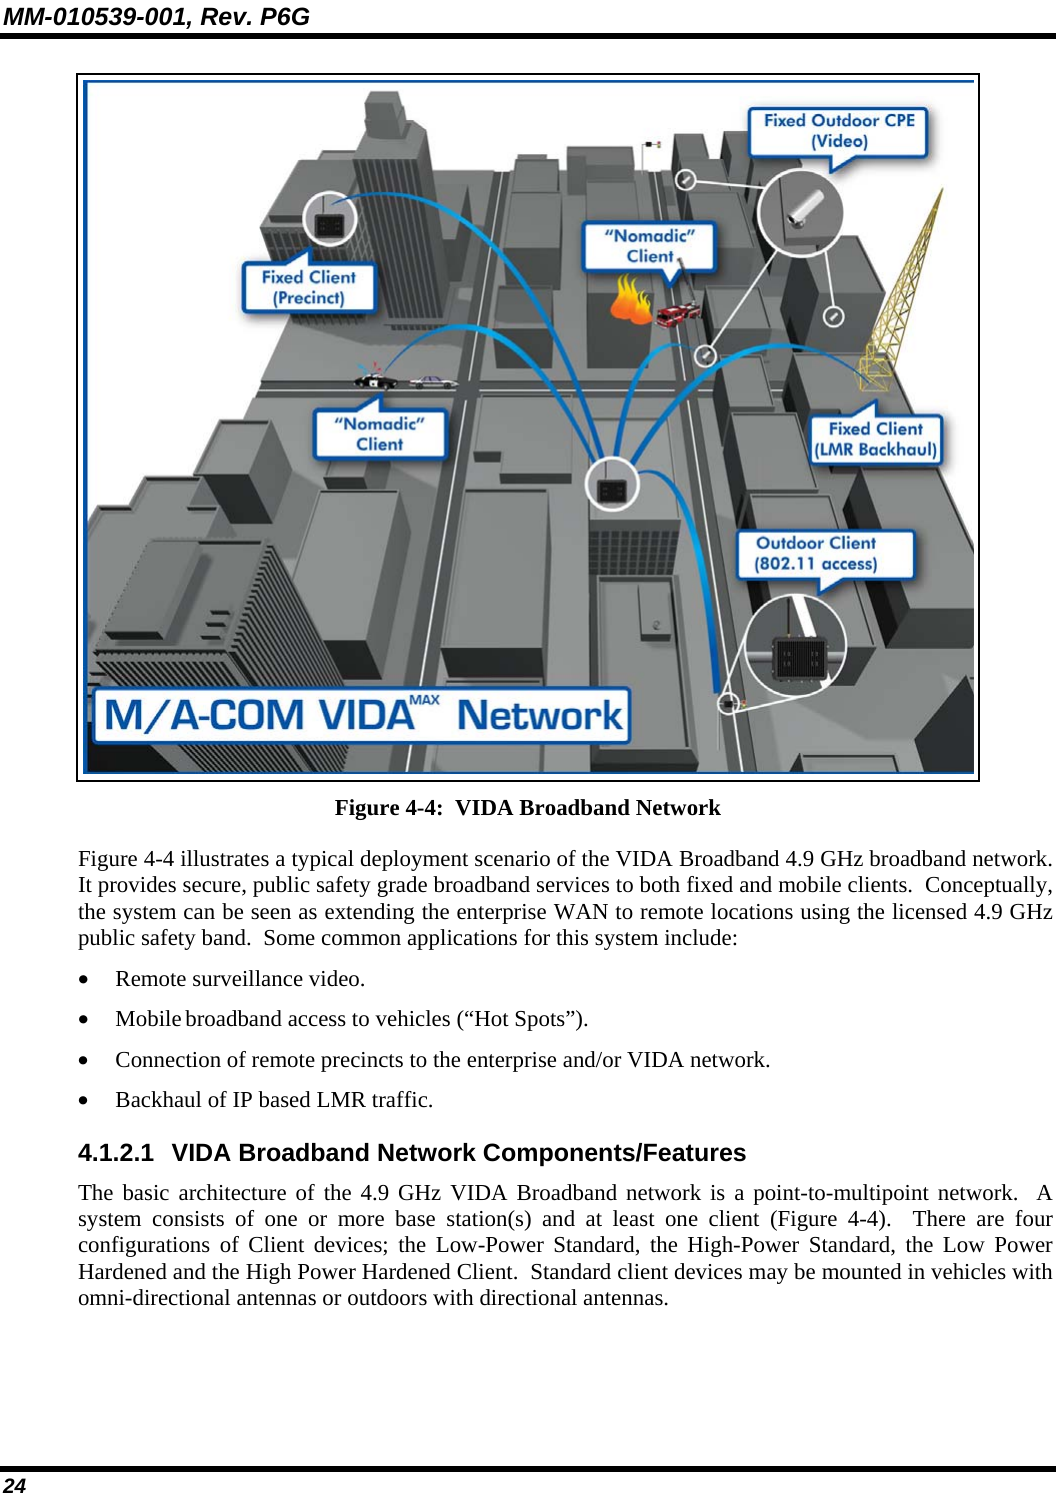 MM-010539-001, Rev. P6G 24  Figure 4-4:  VIDA Broadband Network  Figure 4-4 illustrates a typical deployment scenario of the VIDA Broadband 4.9 GHz broadband network.  It provides secure, public safety grade broadband services to both fixed and mobile clients.  Conceptually, the system can be seen as extending the enterprise WAN to remote locations using the licensed 4.9 GHz public safety band.  Some common applications for this system include: • Remote surveillance video. • Mobile broadband access to vehicles (“Hot Spots”). • Connection of remote precincts to the enterprise and/or VIDA network. • Backhaul of IP based LMR traffic. 4.1.2.1  VIDA Broadband Network Components/Features The basic architecture of the 4.9 GHz VIDA Broadband network is a point-to-multipoint network.  A system consists of one or more base station(s) and at least one client (Figure 4-4).  There are four configurations of Client devices; the Low-Power Standard, the High-Power Standard, the Low Power Hardened and the High Power Hardened Client.  Standard client devices may be mounted in vehicles with omni-directional antennas or outdoors with directional antennas. 